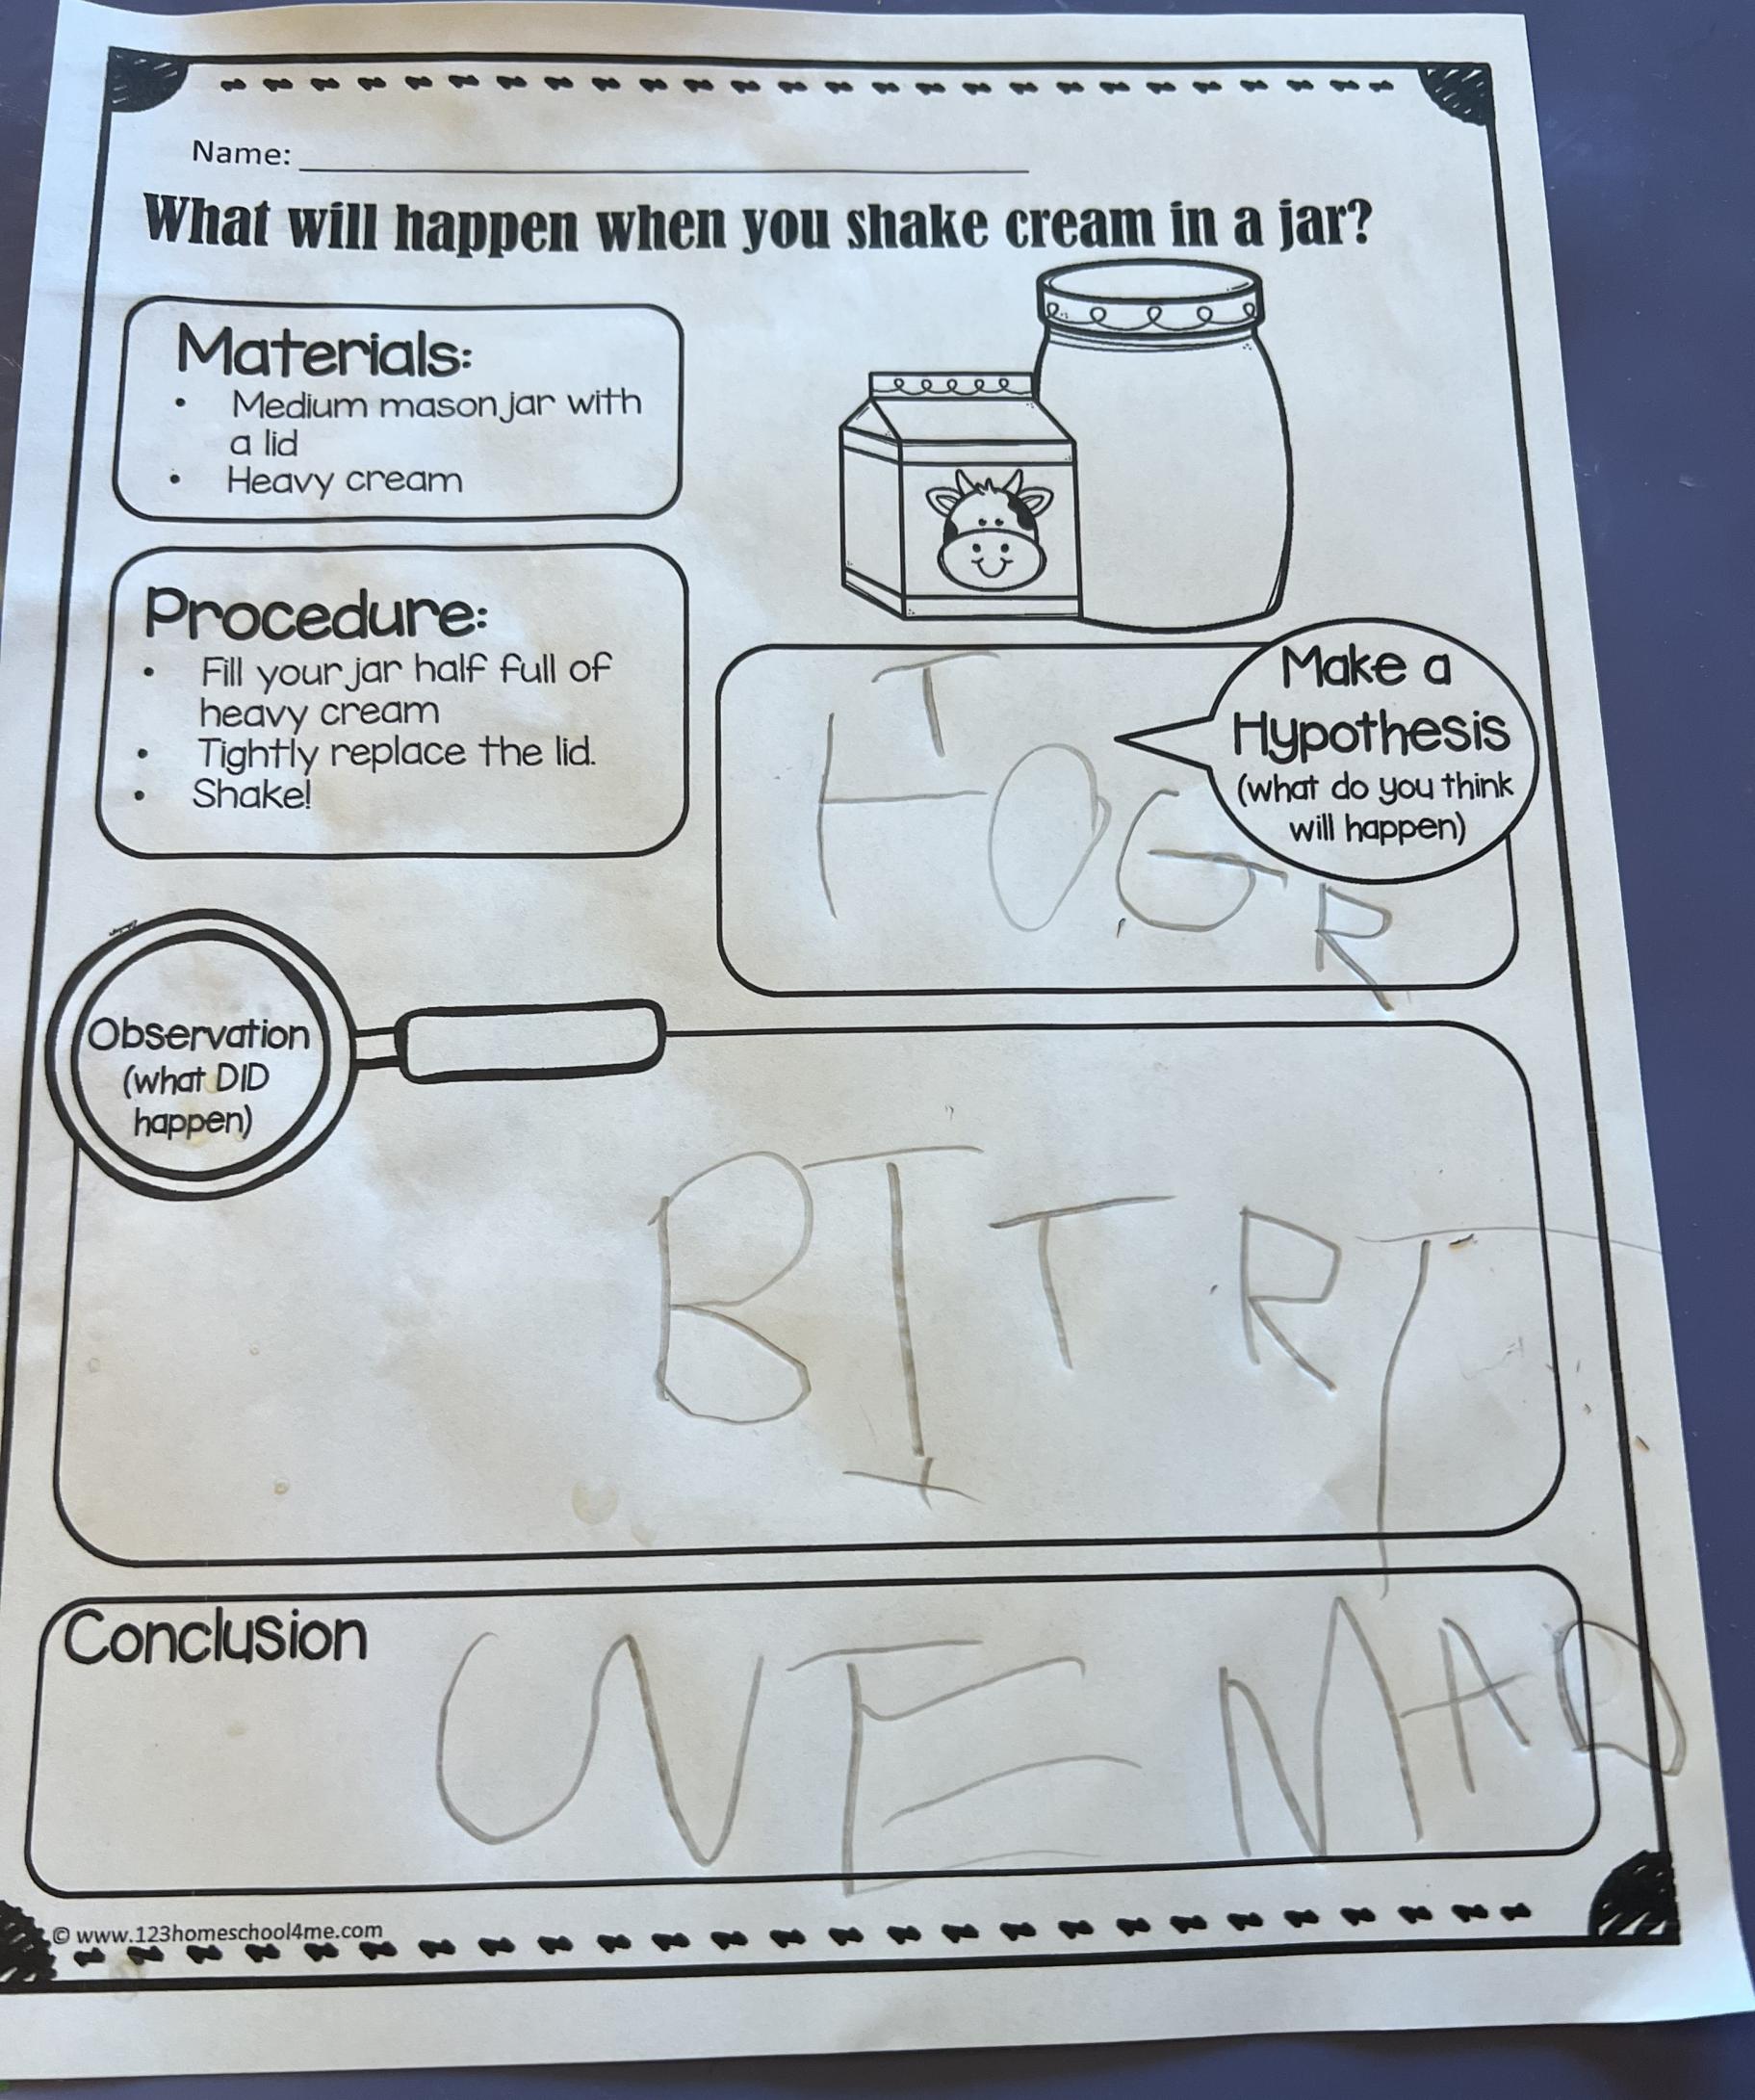 a photo of a young child's worksheet about shaking cream in a jar to make butter